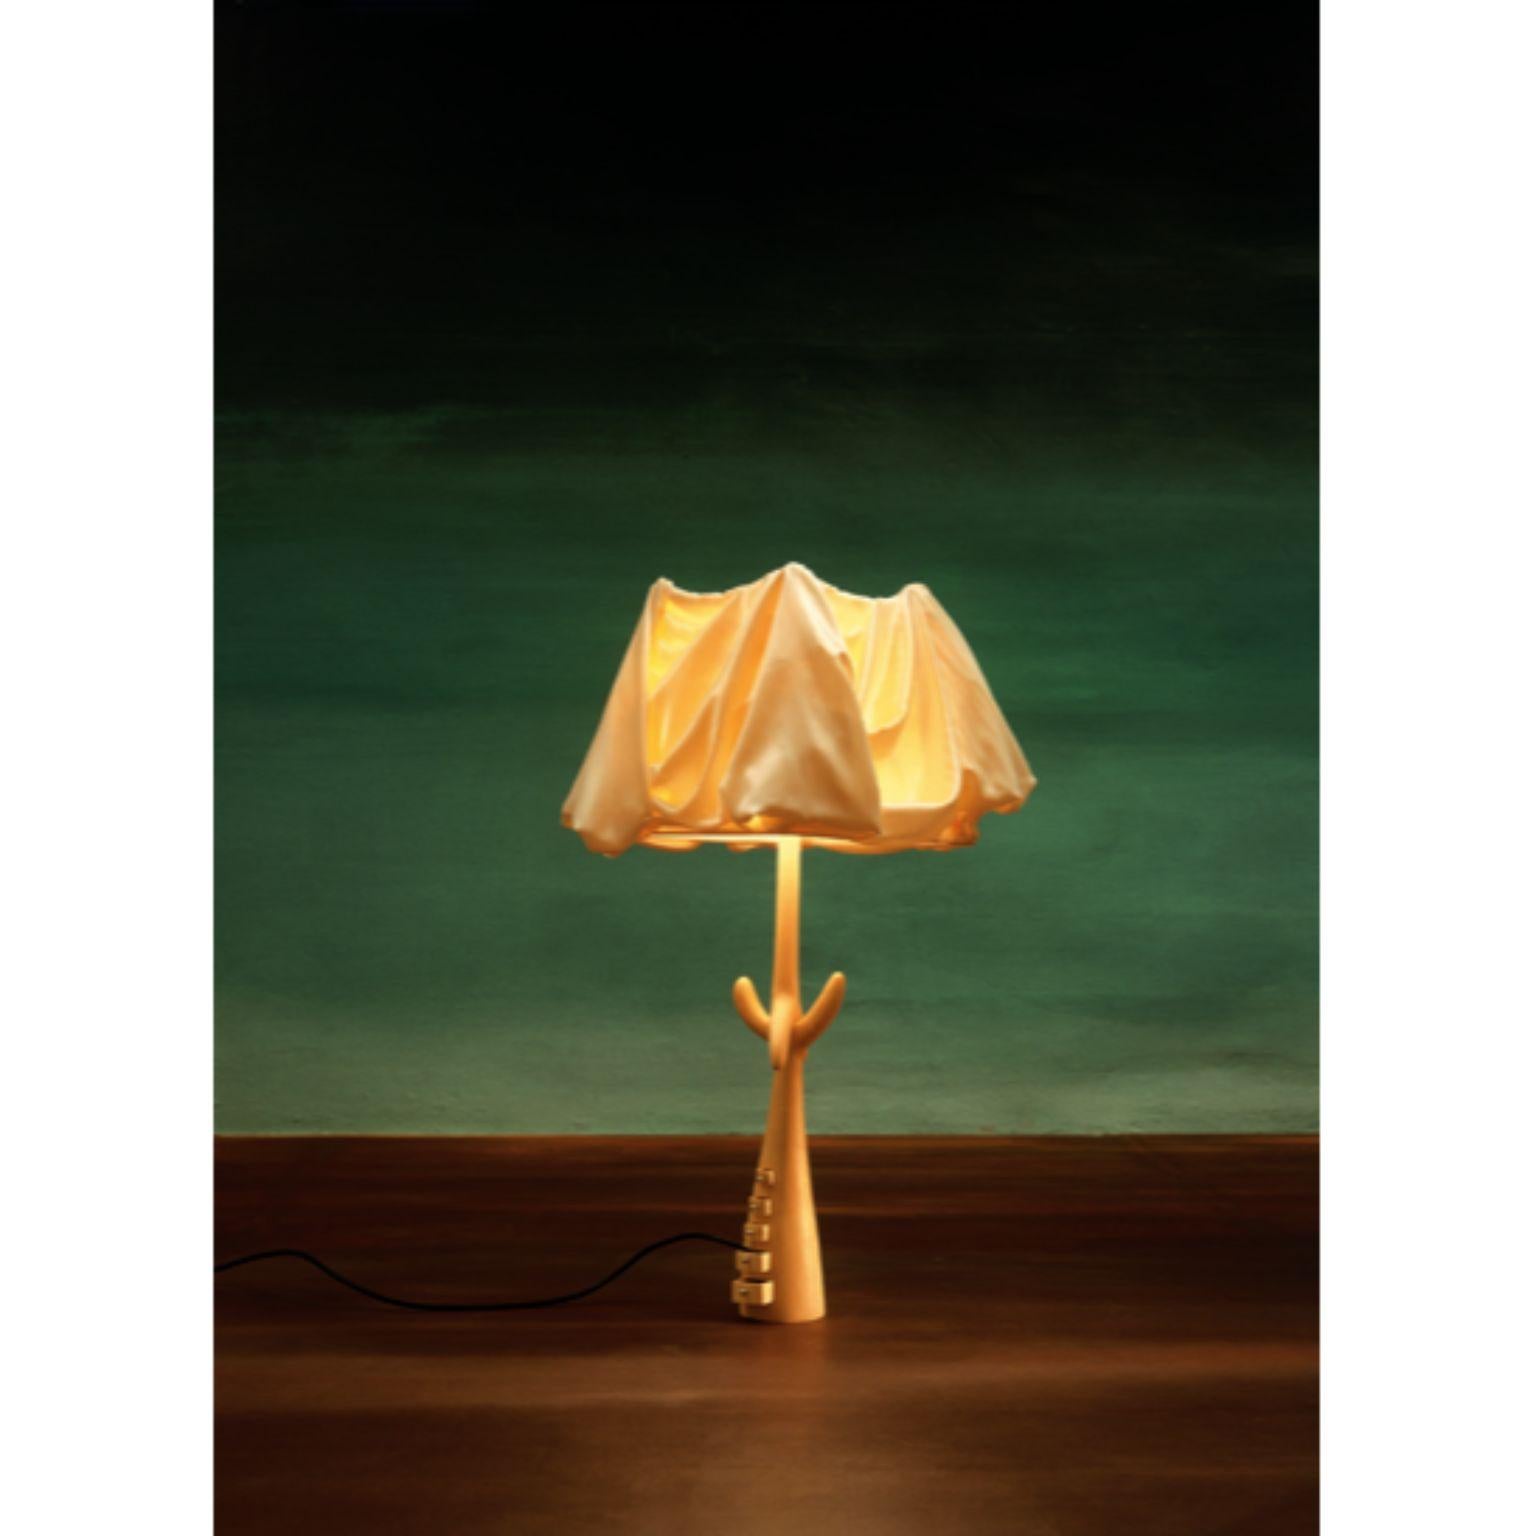 Muletas lamp, Salvador Dalí
Dimensions: 30 x 30 x 87 H cm
Materials: Carved structure in pale varnished lime-wood.
Lamp shade in beige linen.

The Bracelli lamp has a wooden board structure covered in fine gilding also available in a darker version.